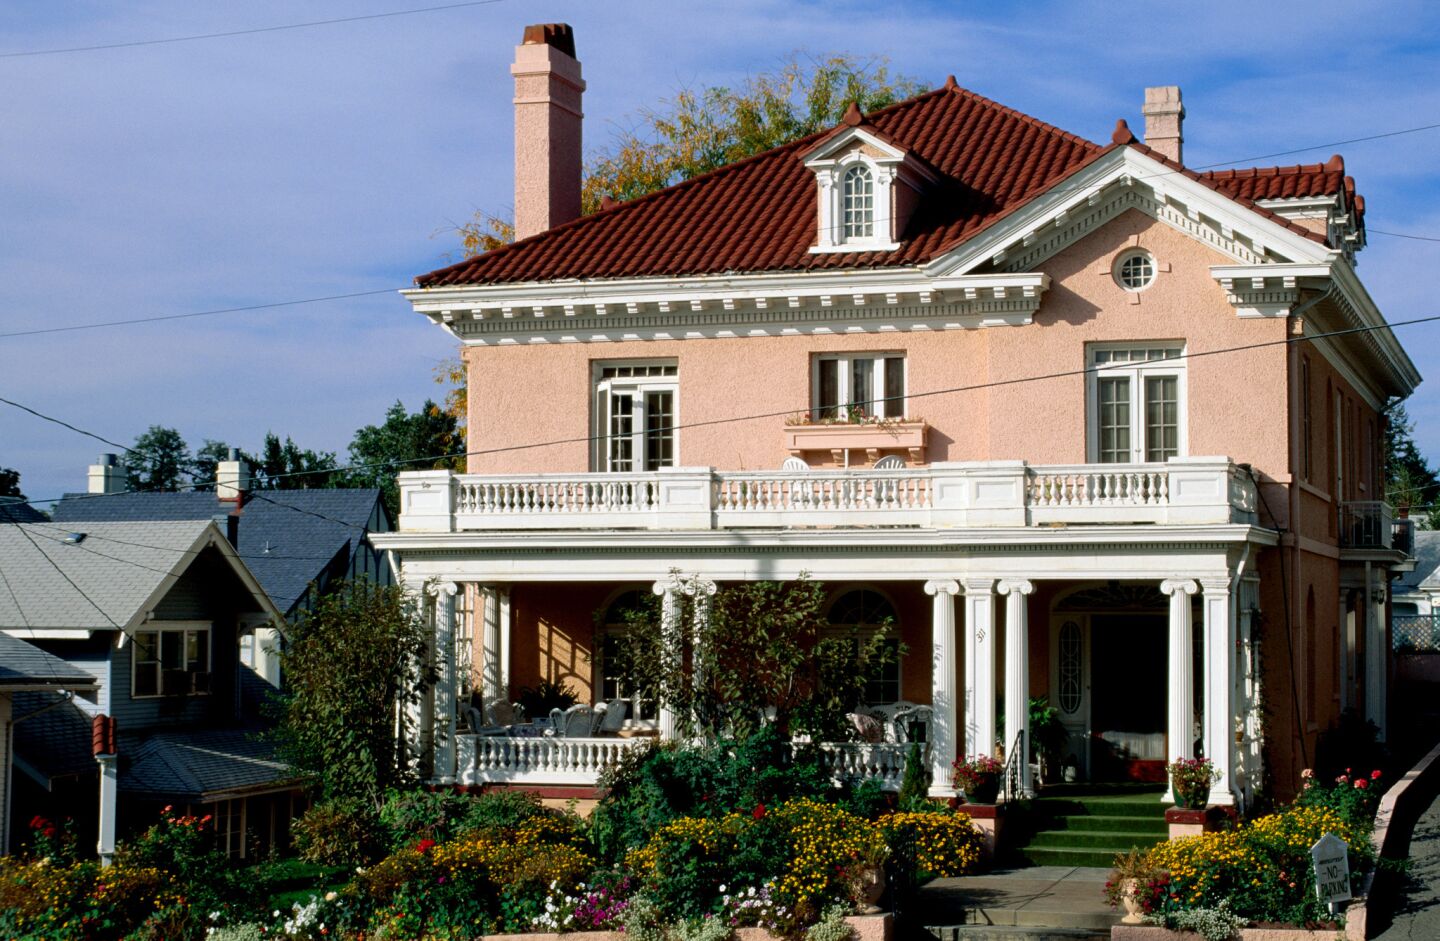 Given its color -- pink -- it's hard to miss the Pendleton House Historic Inn, a B&B located on a hill above downtown.